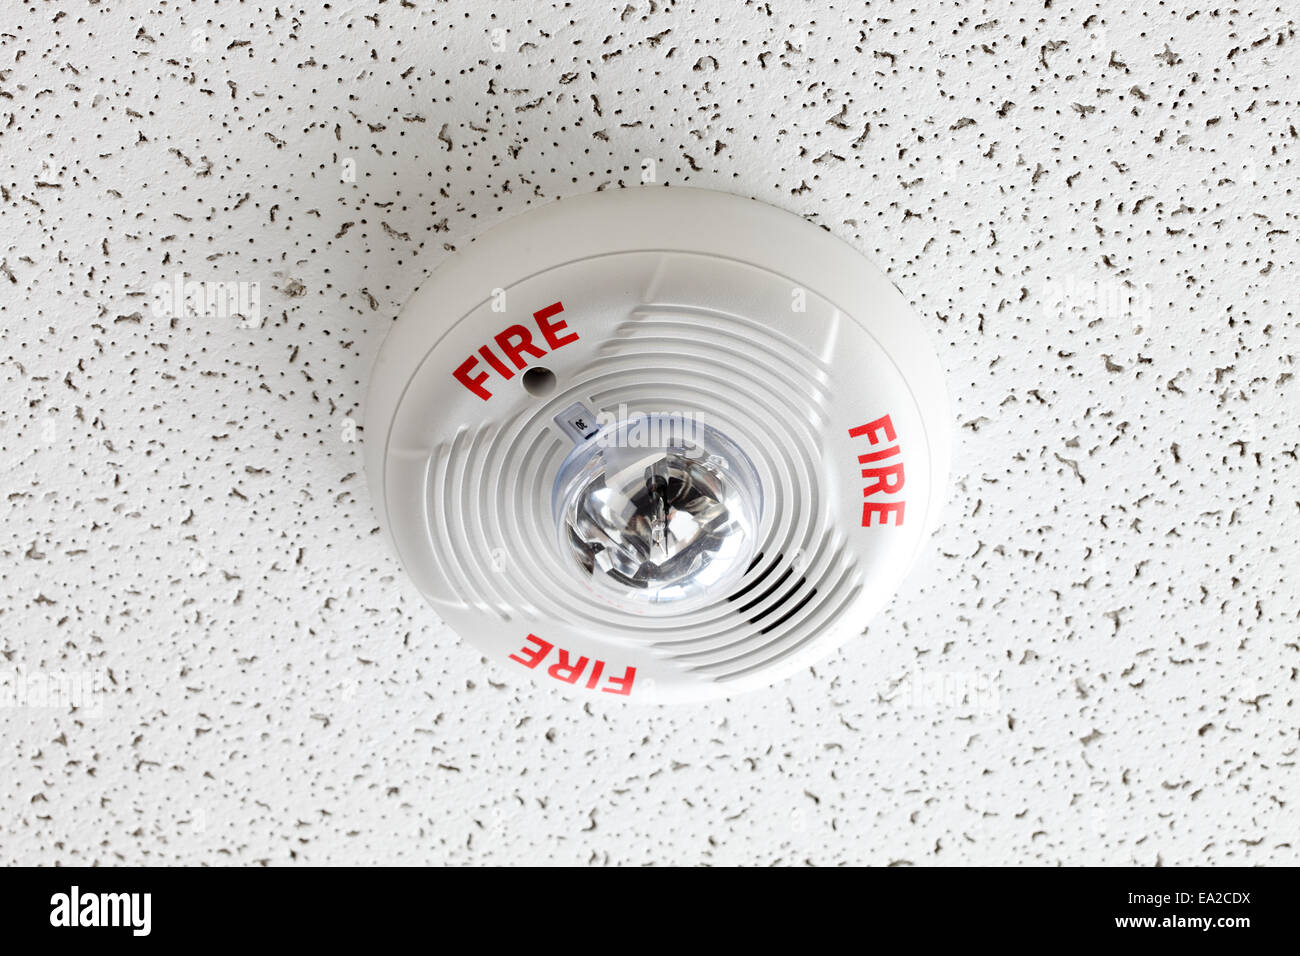 A ceiling mounted fire alarm and smoke detector Stock Photo